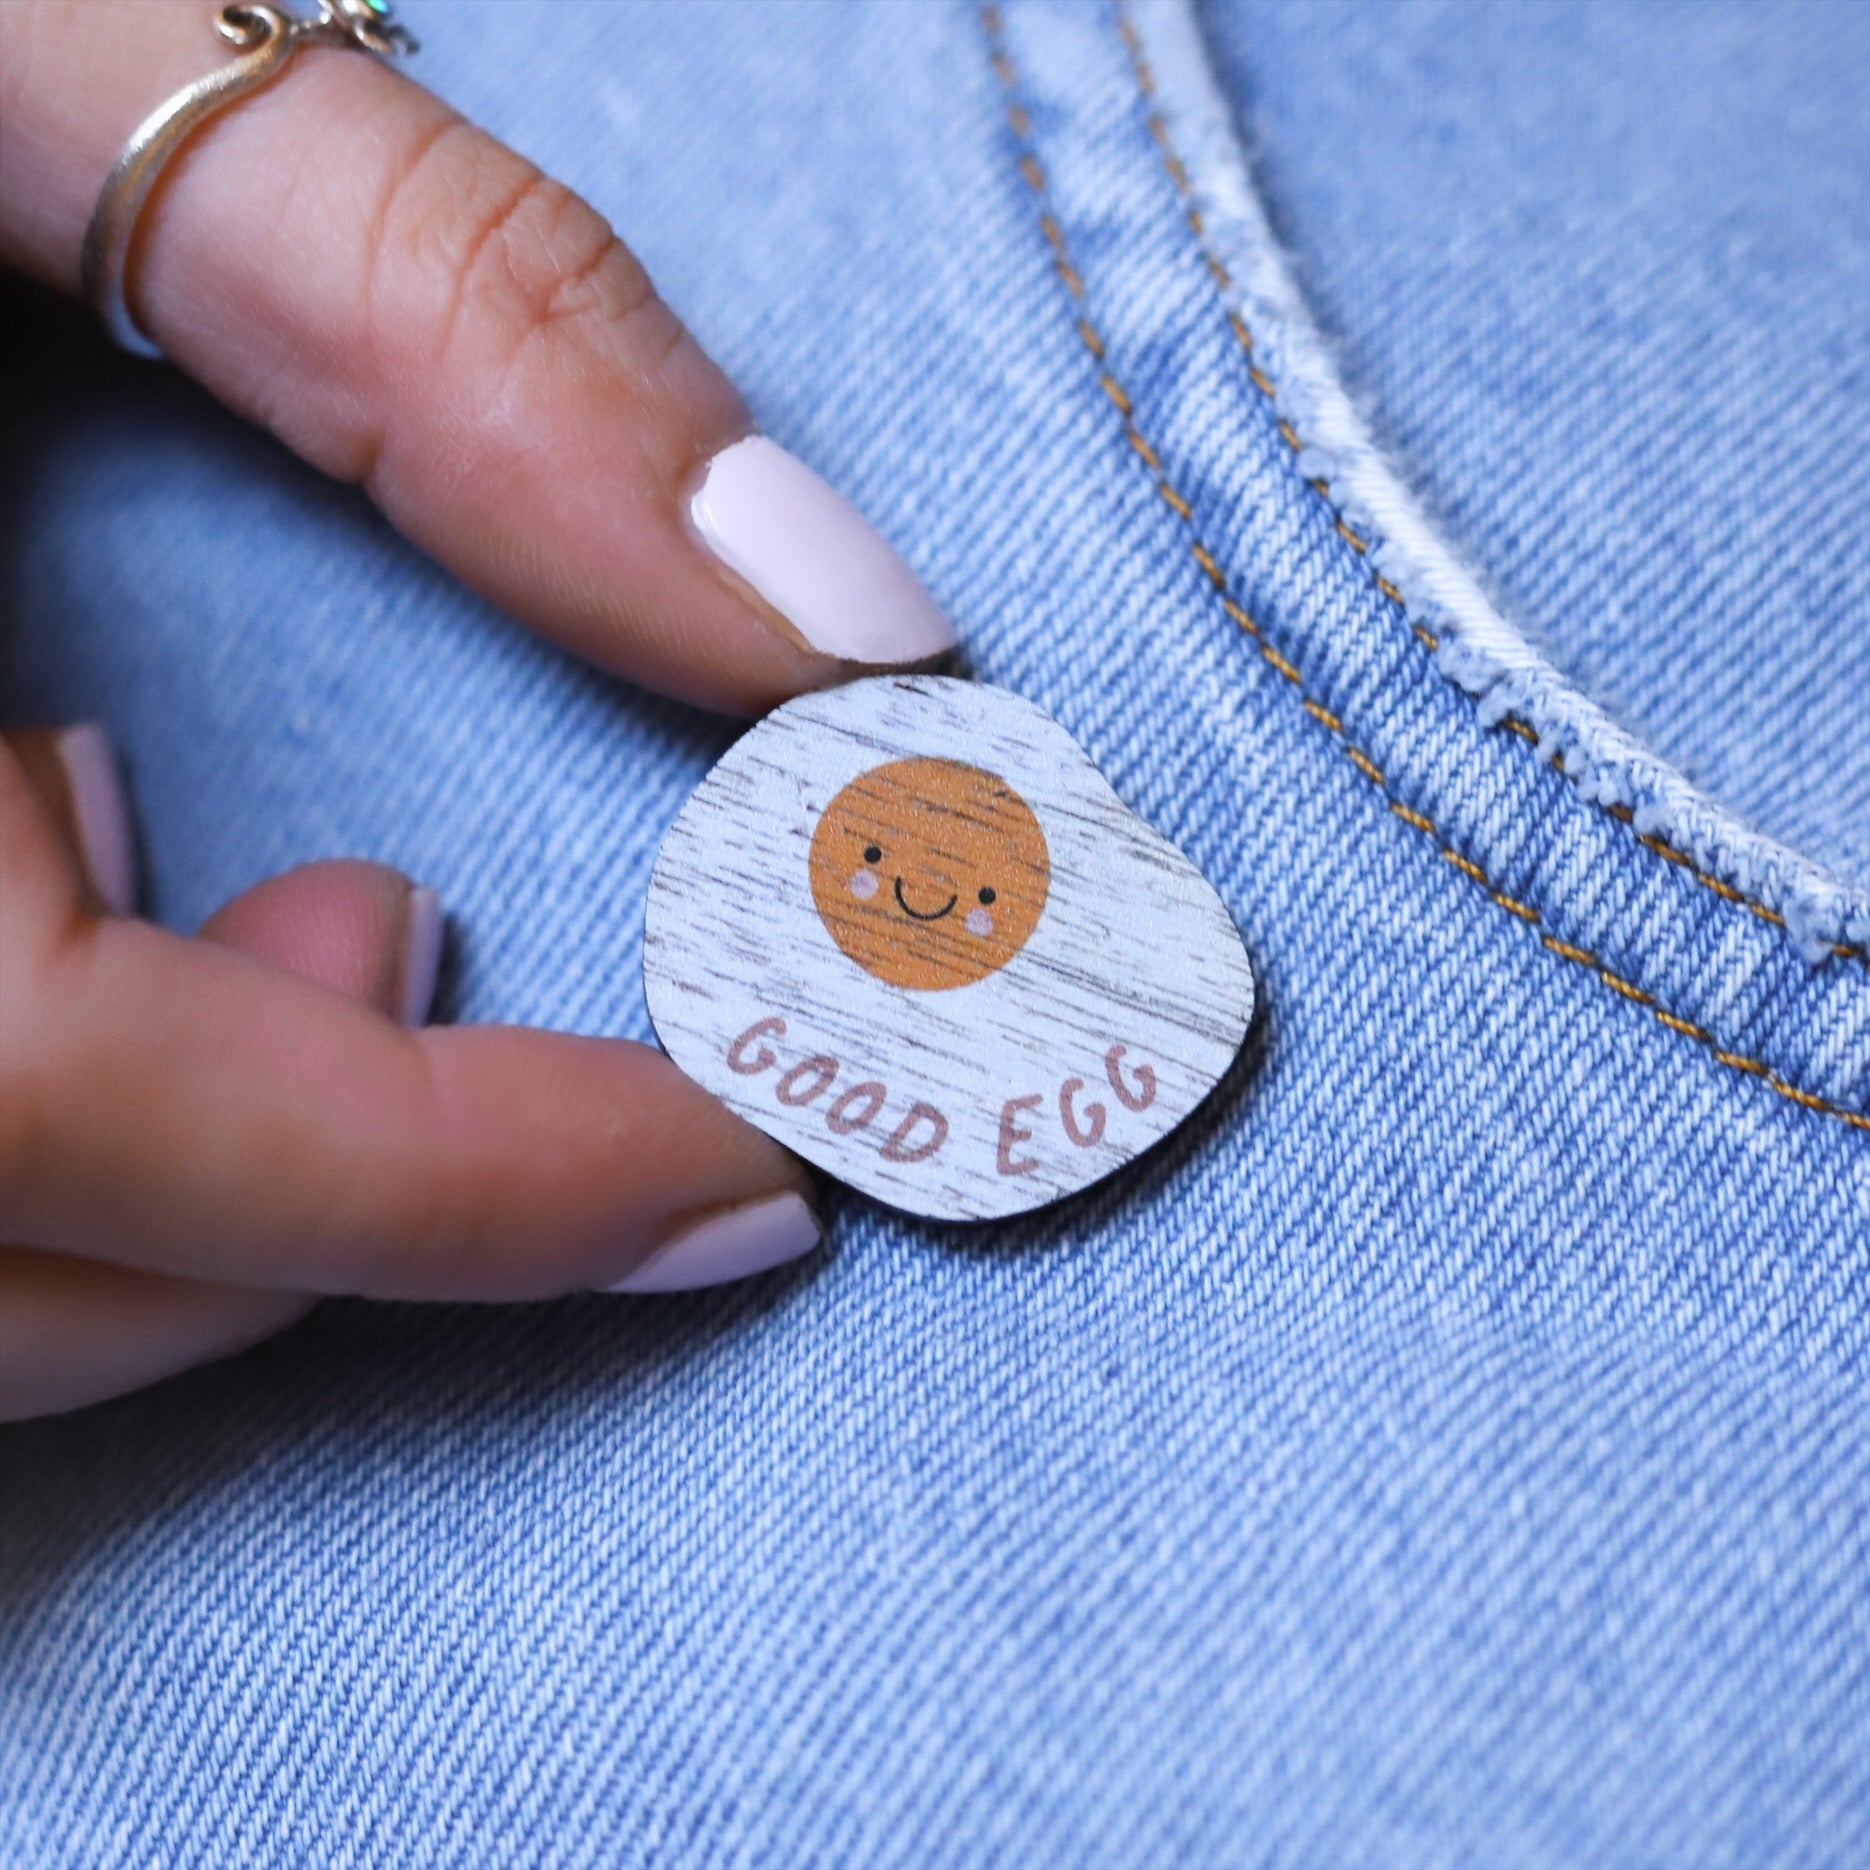 Wooden pin badge in the shape of a fried egg, with a cute smiley face and rosy cheeks. Printed on walnut veneer with the words 'good egg' along the bottom. Pinned onto the pocket of blue jeans. 